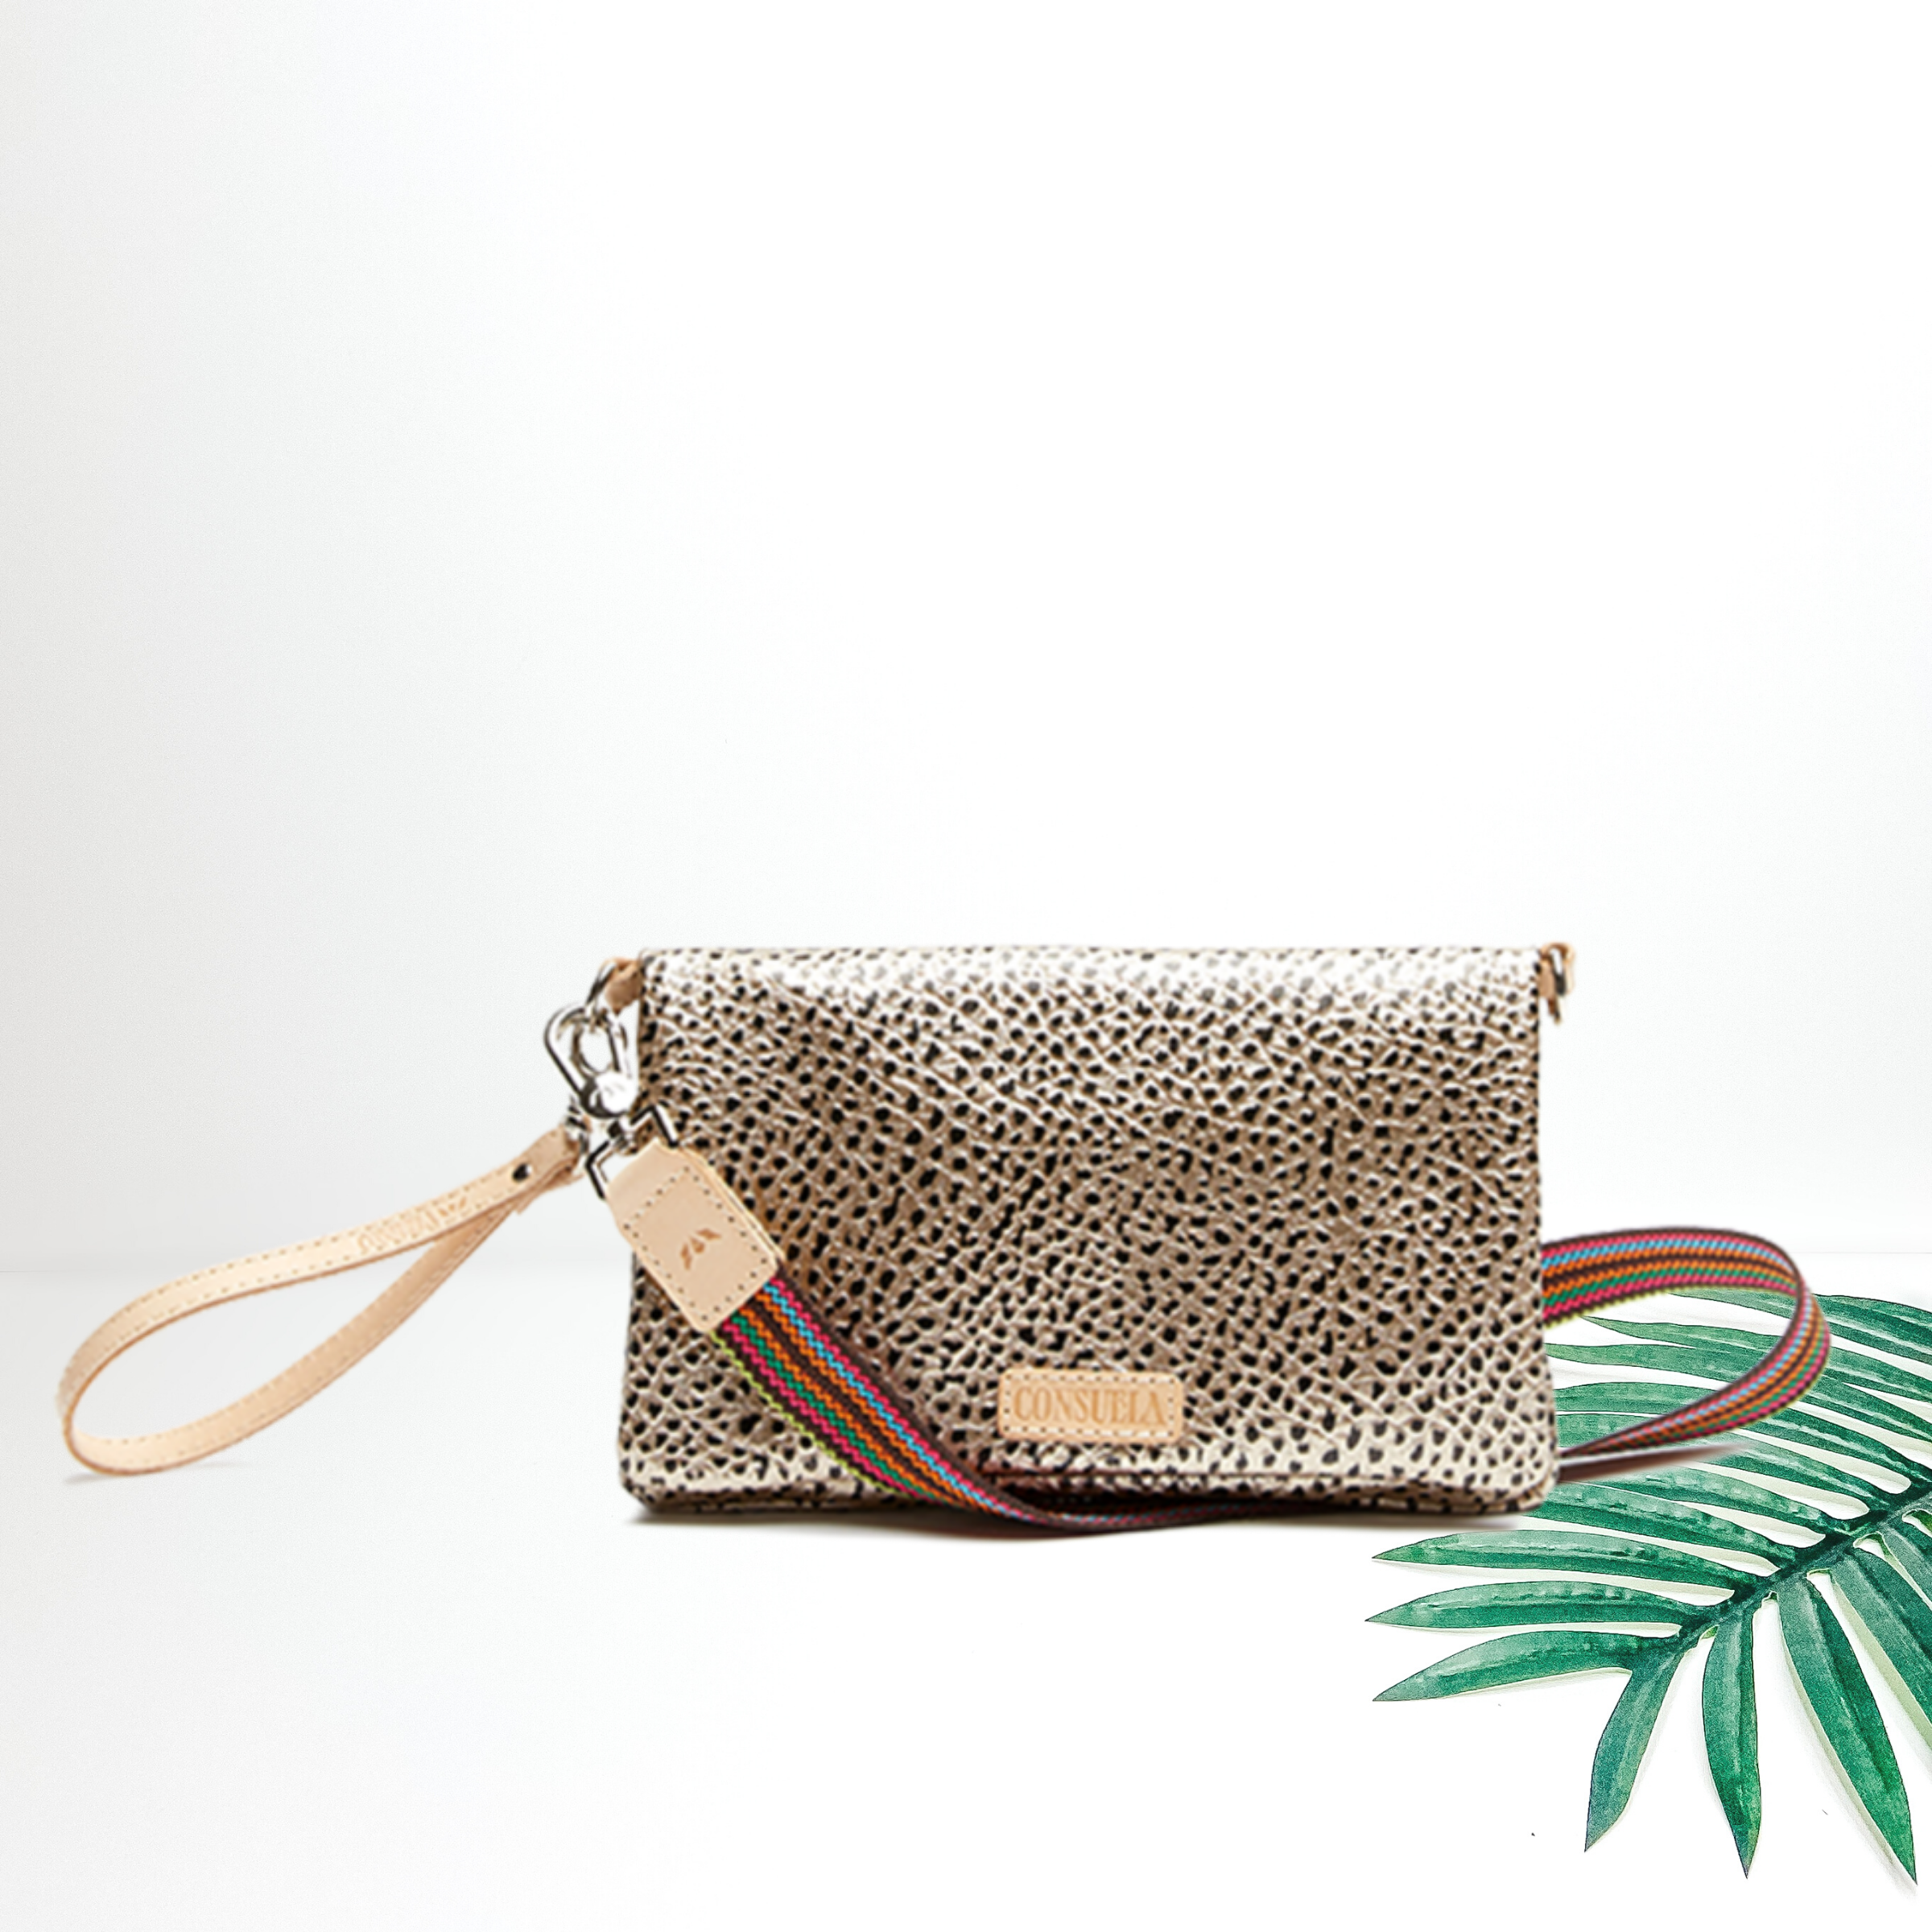 A gold metallic crossbody bag with a leather wristlet strap. Pictured on white background with a palm leaf.